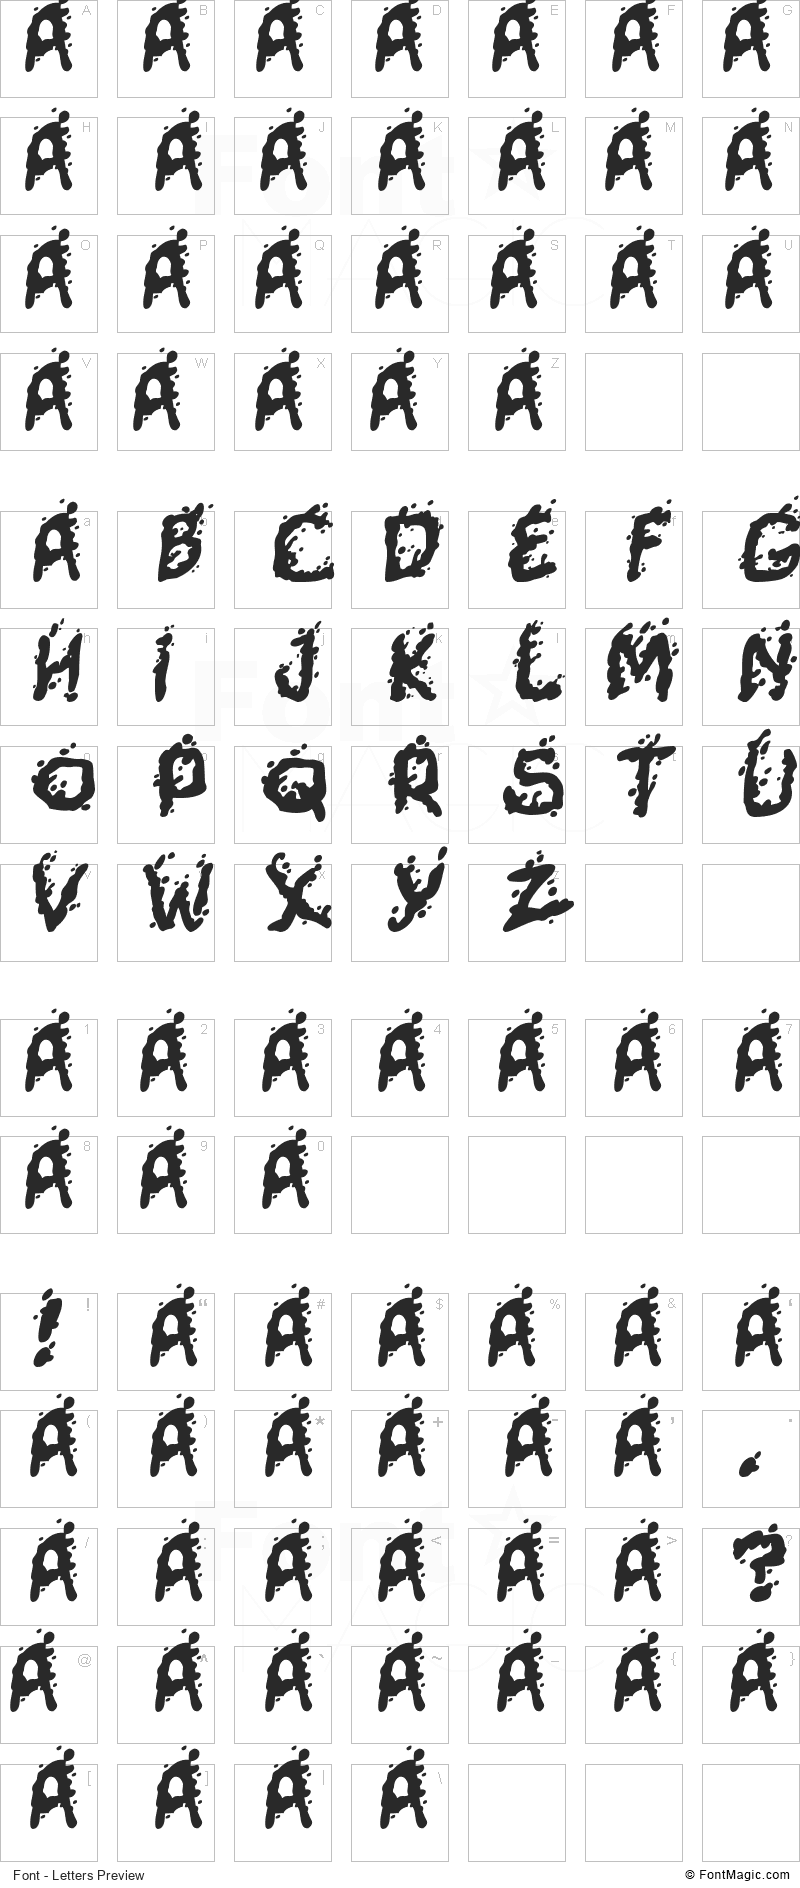 Mutant Supermodel Font - All Latters Preview Chart